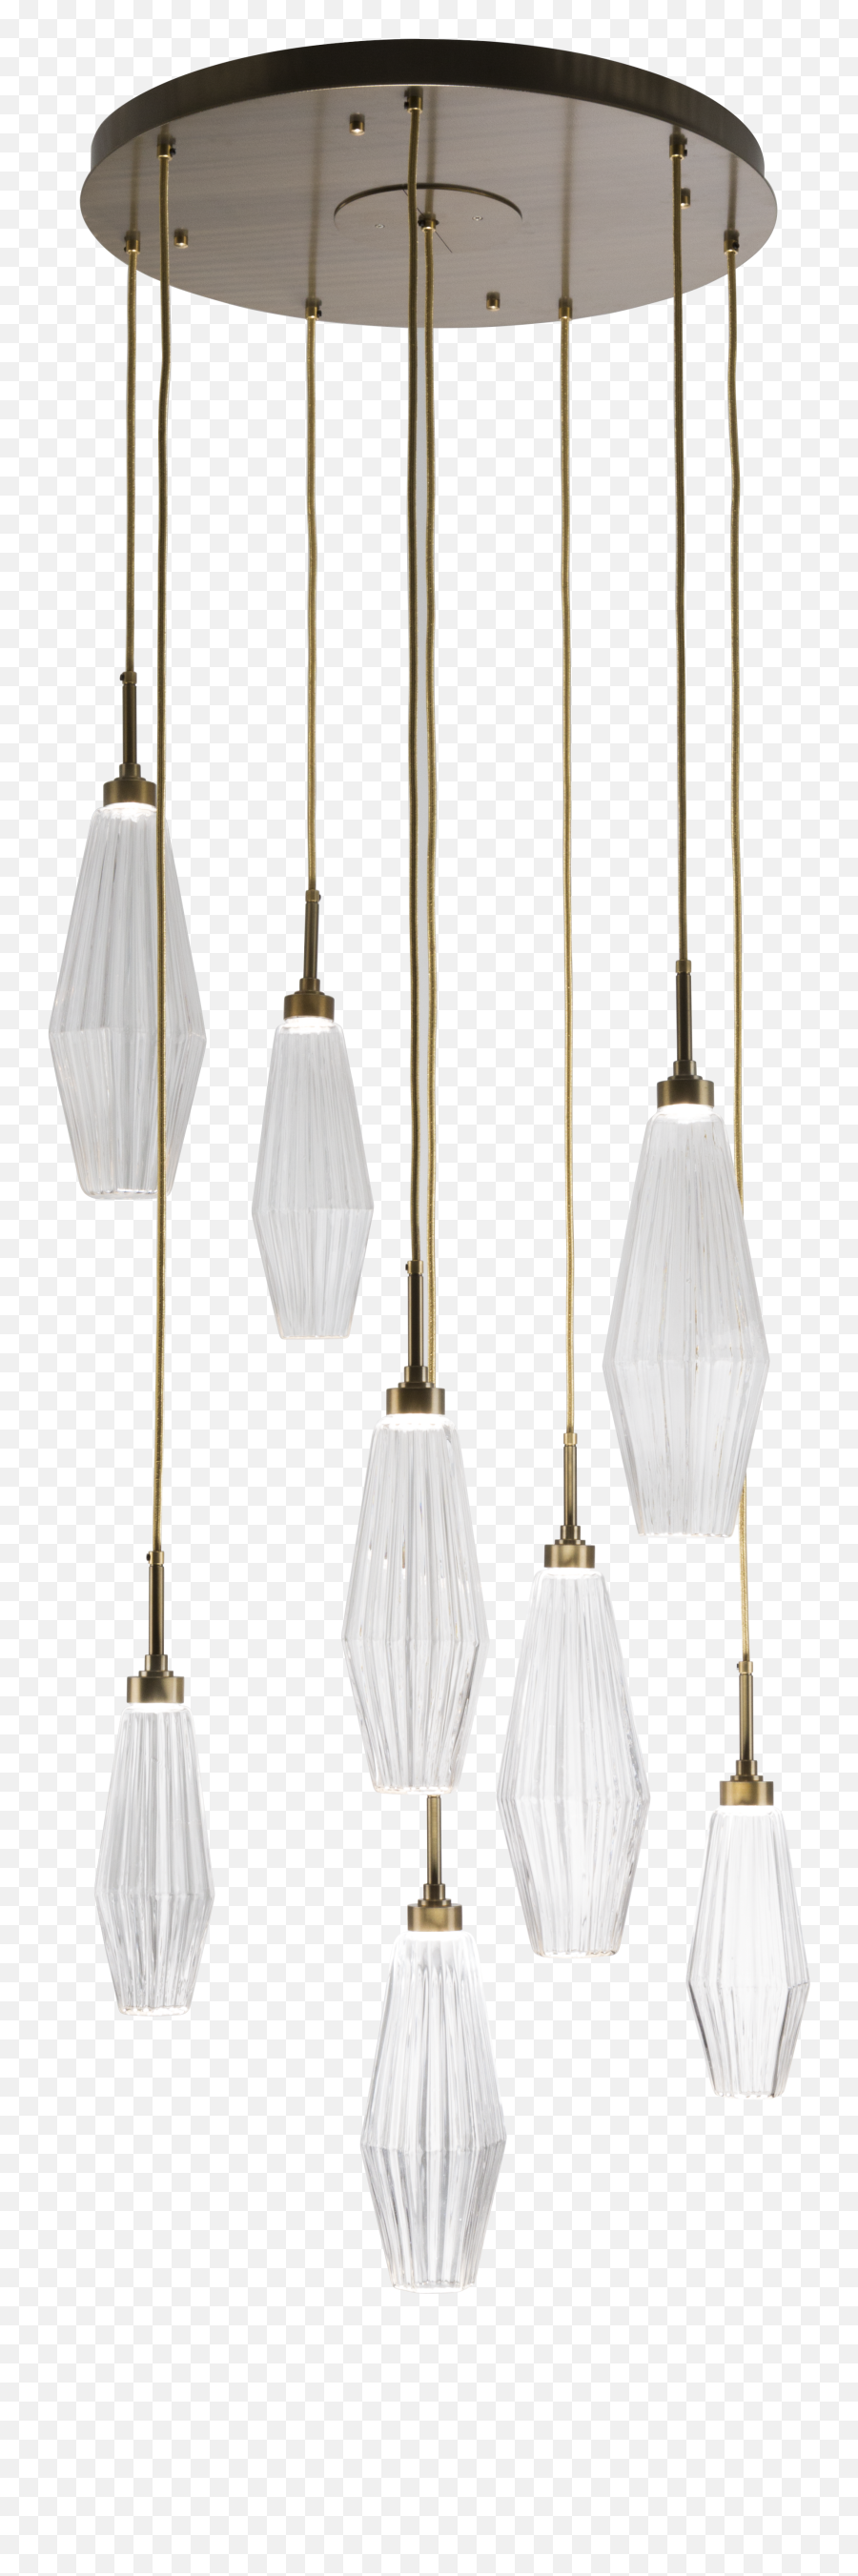 Chandeliers - Lampshade Png,Chandelier Png